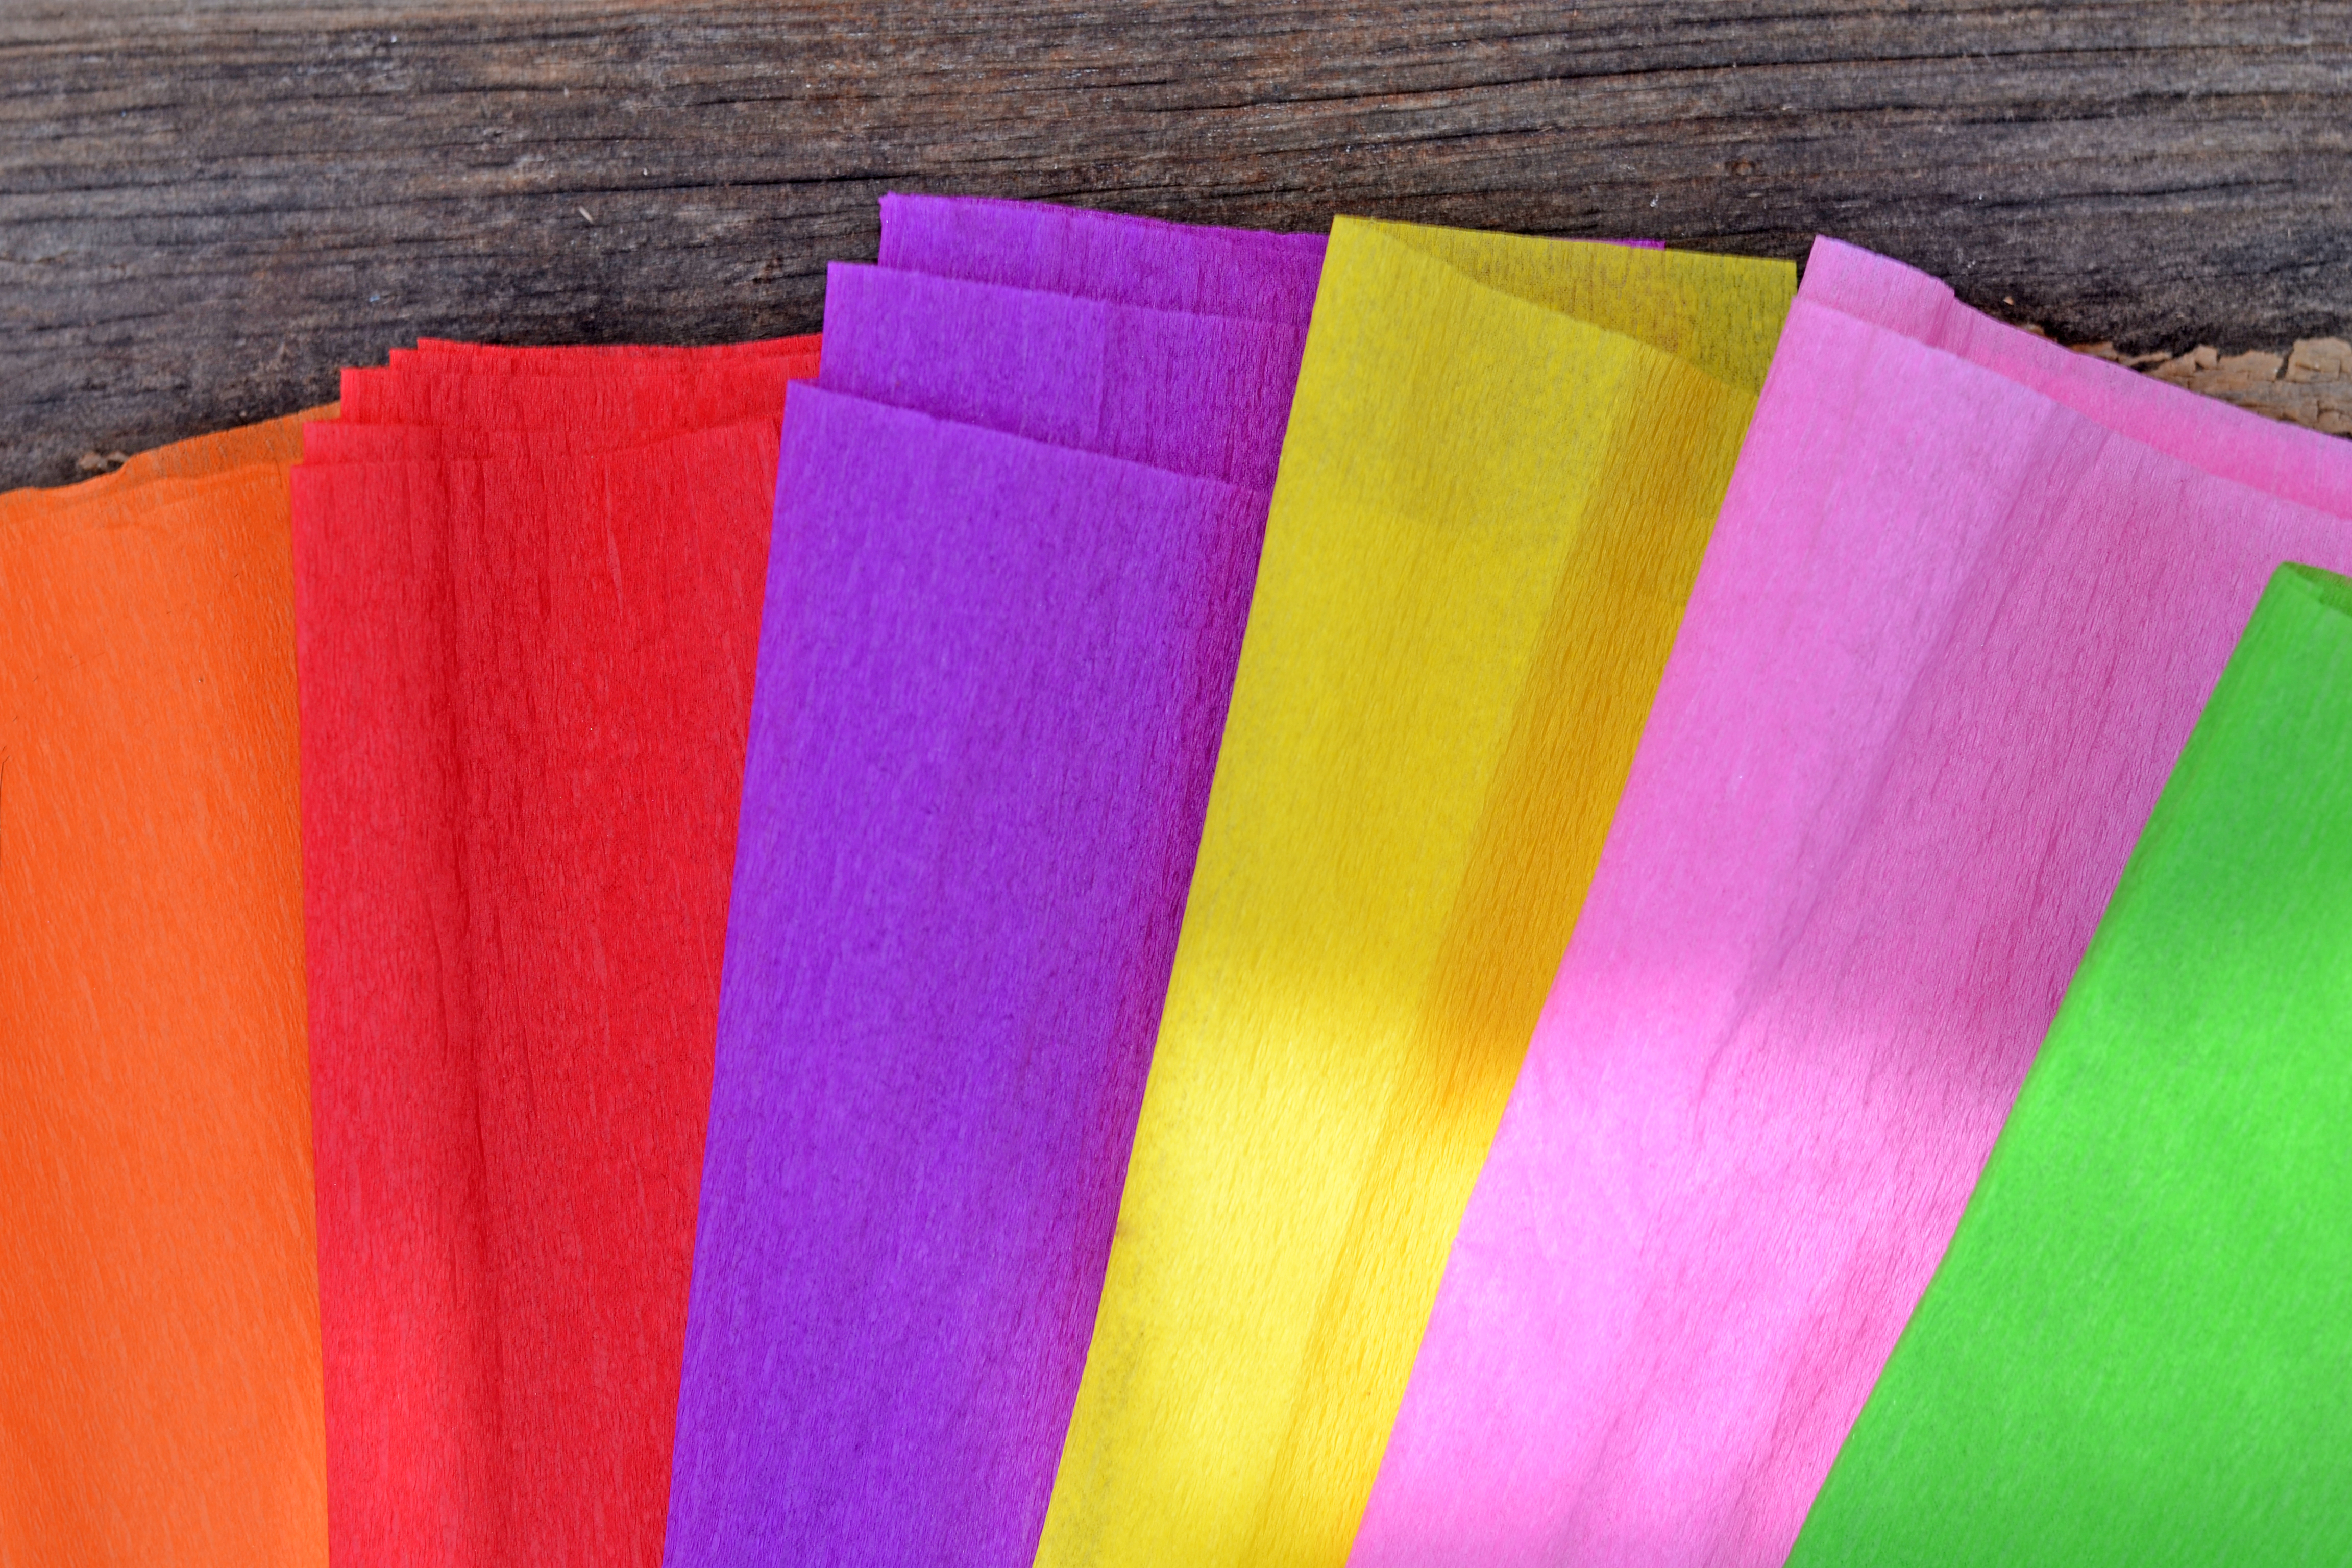 Colorful tissue paper examples using colorants